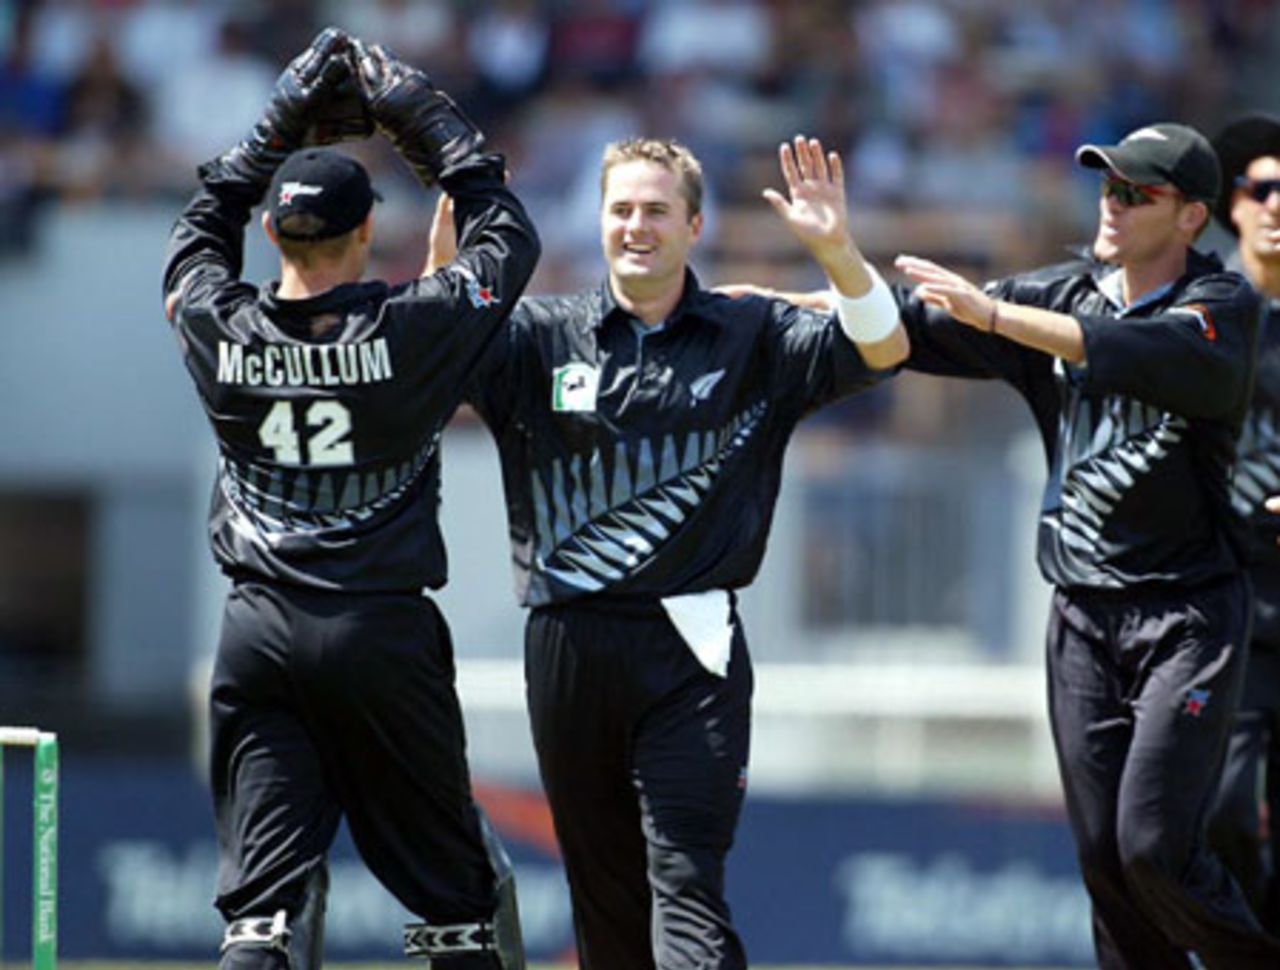 New Zealand players Brendon McCullum (left), Paul Hitchcock and Lou Vincent celebrate the dismissal of Indian batsman VVS Laxman, caught by McCullum off the bowling of Hitchcock for 10. 3rd ODI: New Zealand v India at Jade Stadium, Christchurch, 1 January 2003.